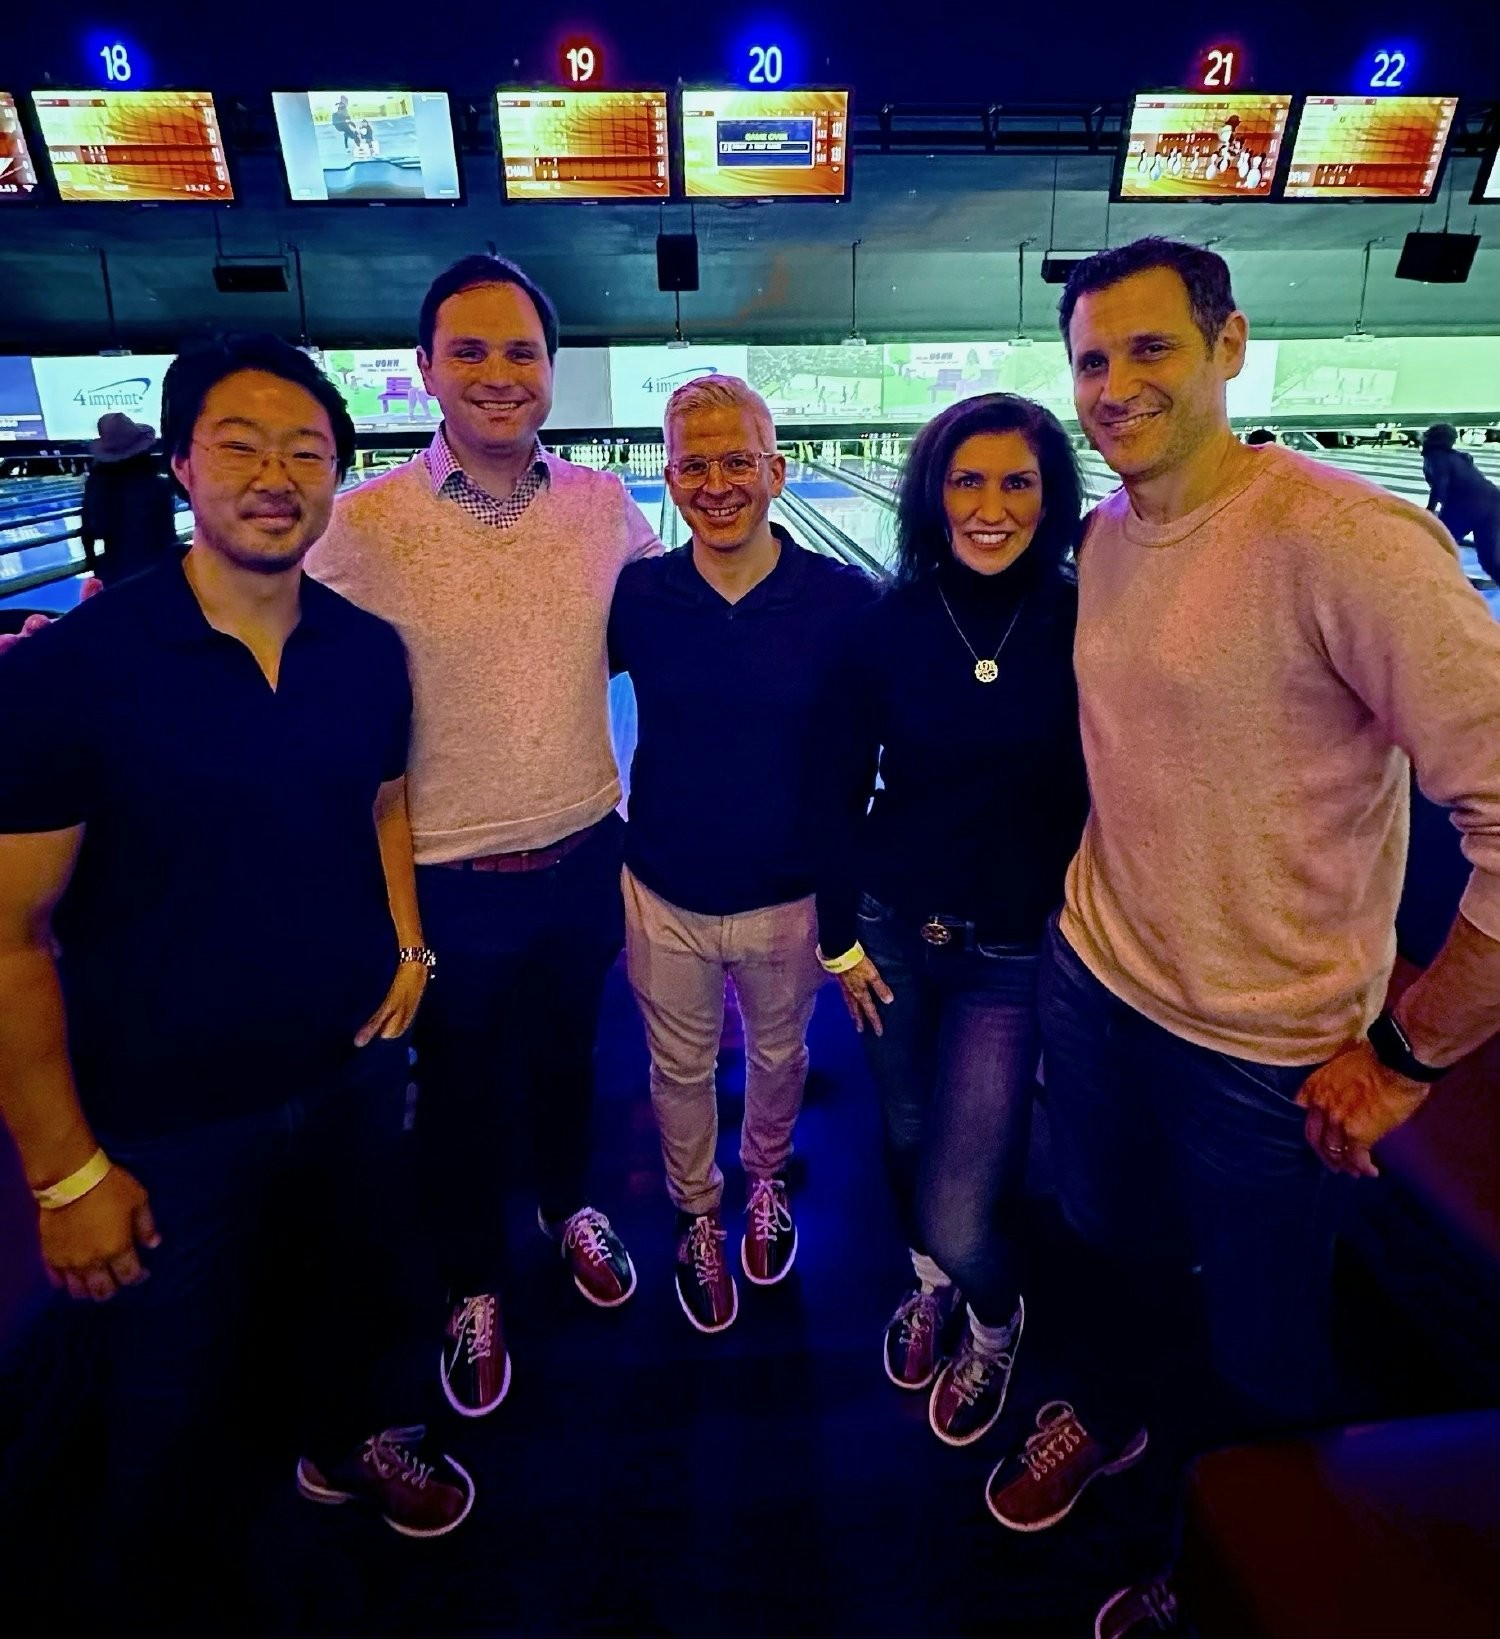 Firm mentoring groups met to compete in a friendly and fun bowling challenge.